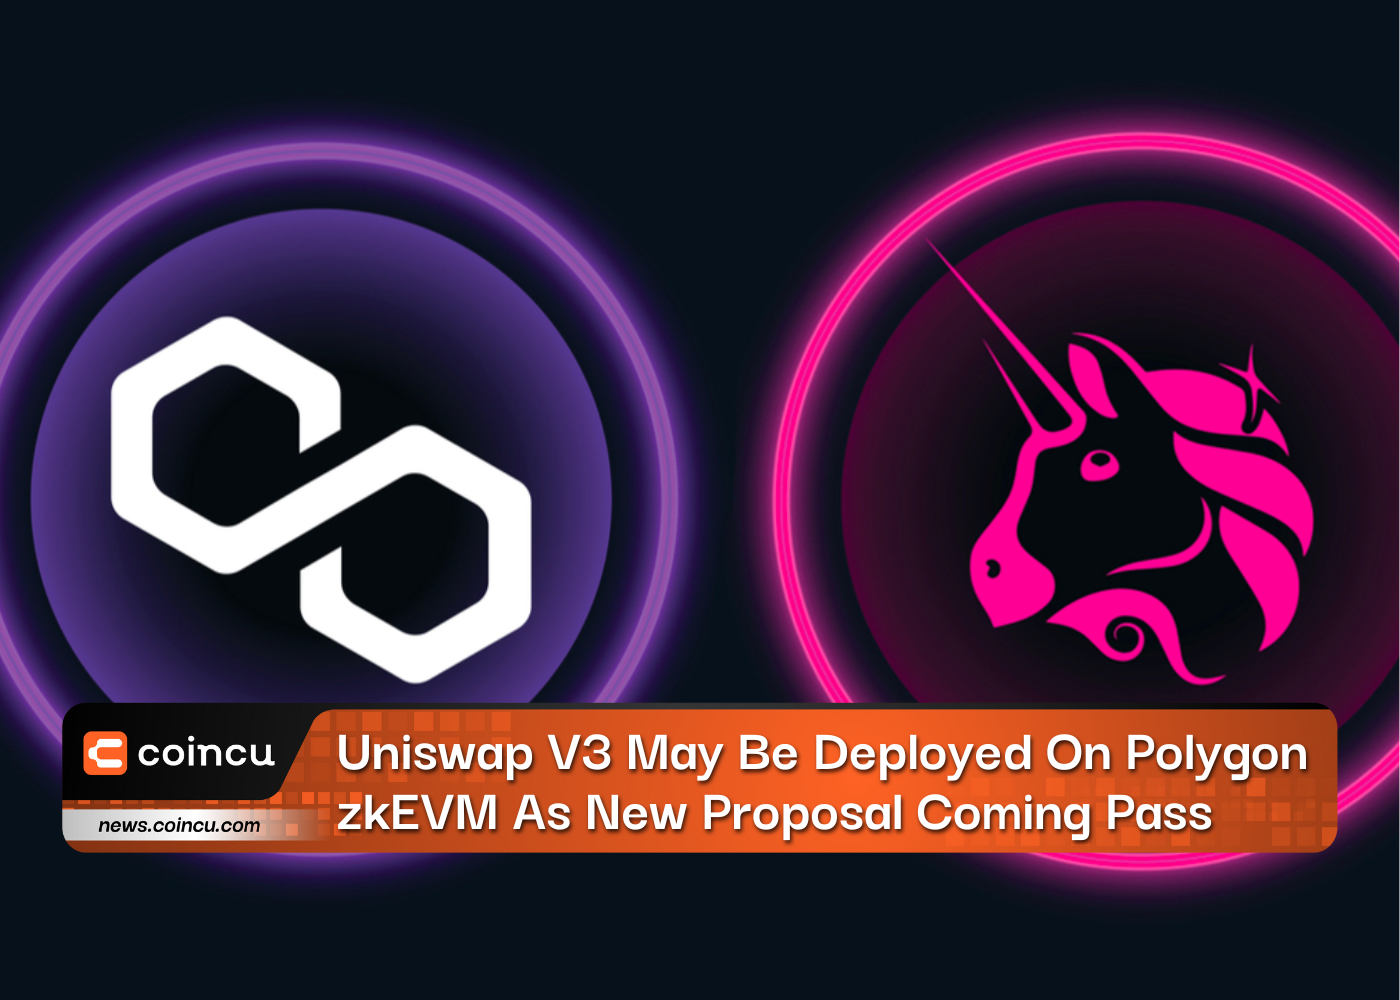 Uniswap V3 May Be Deployed On Polygon zkEVM As New Proposal Coming Pass